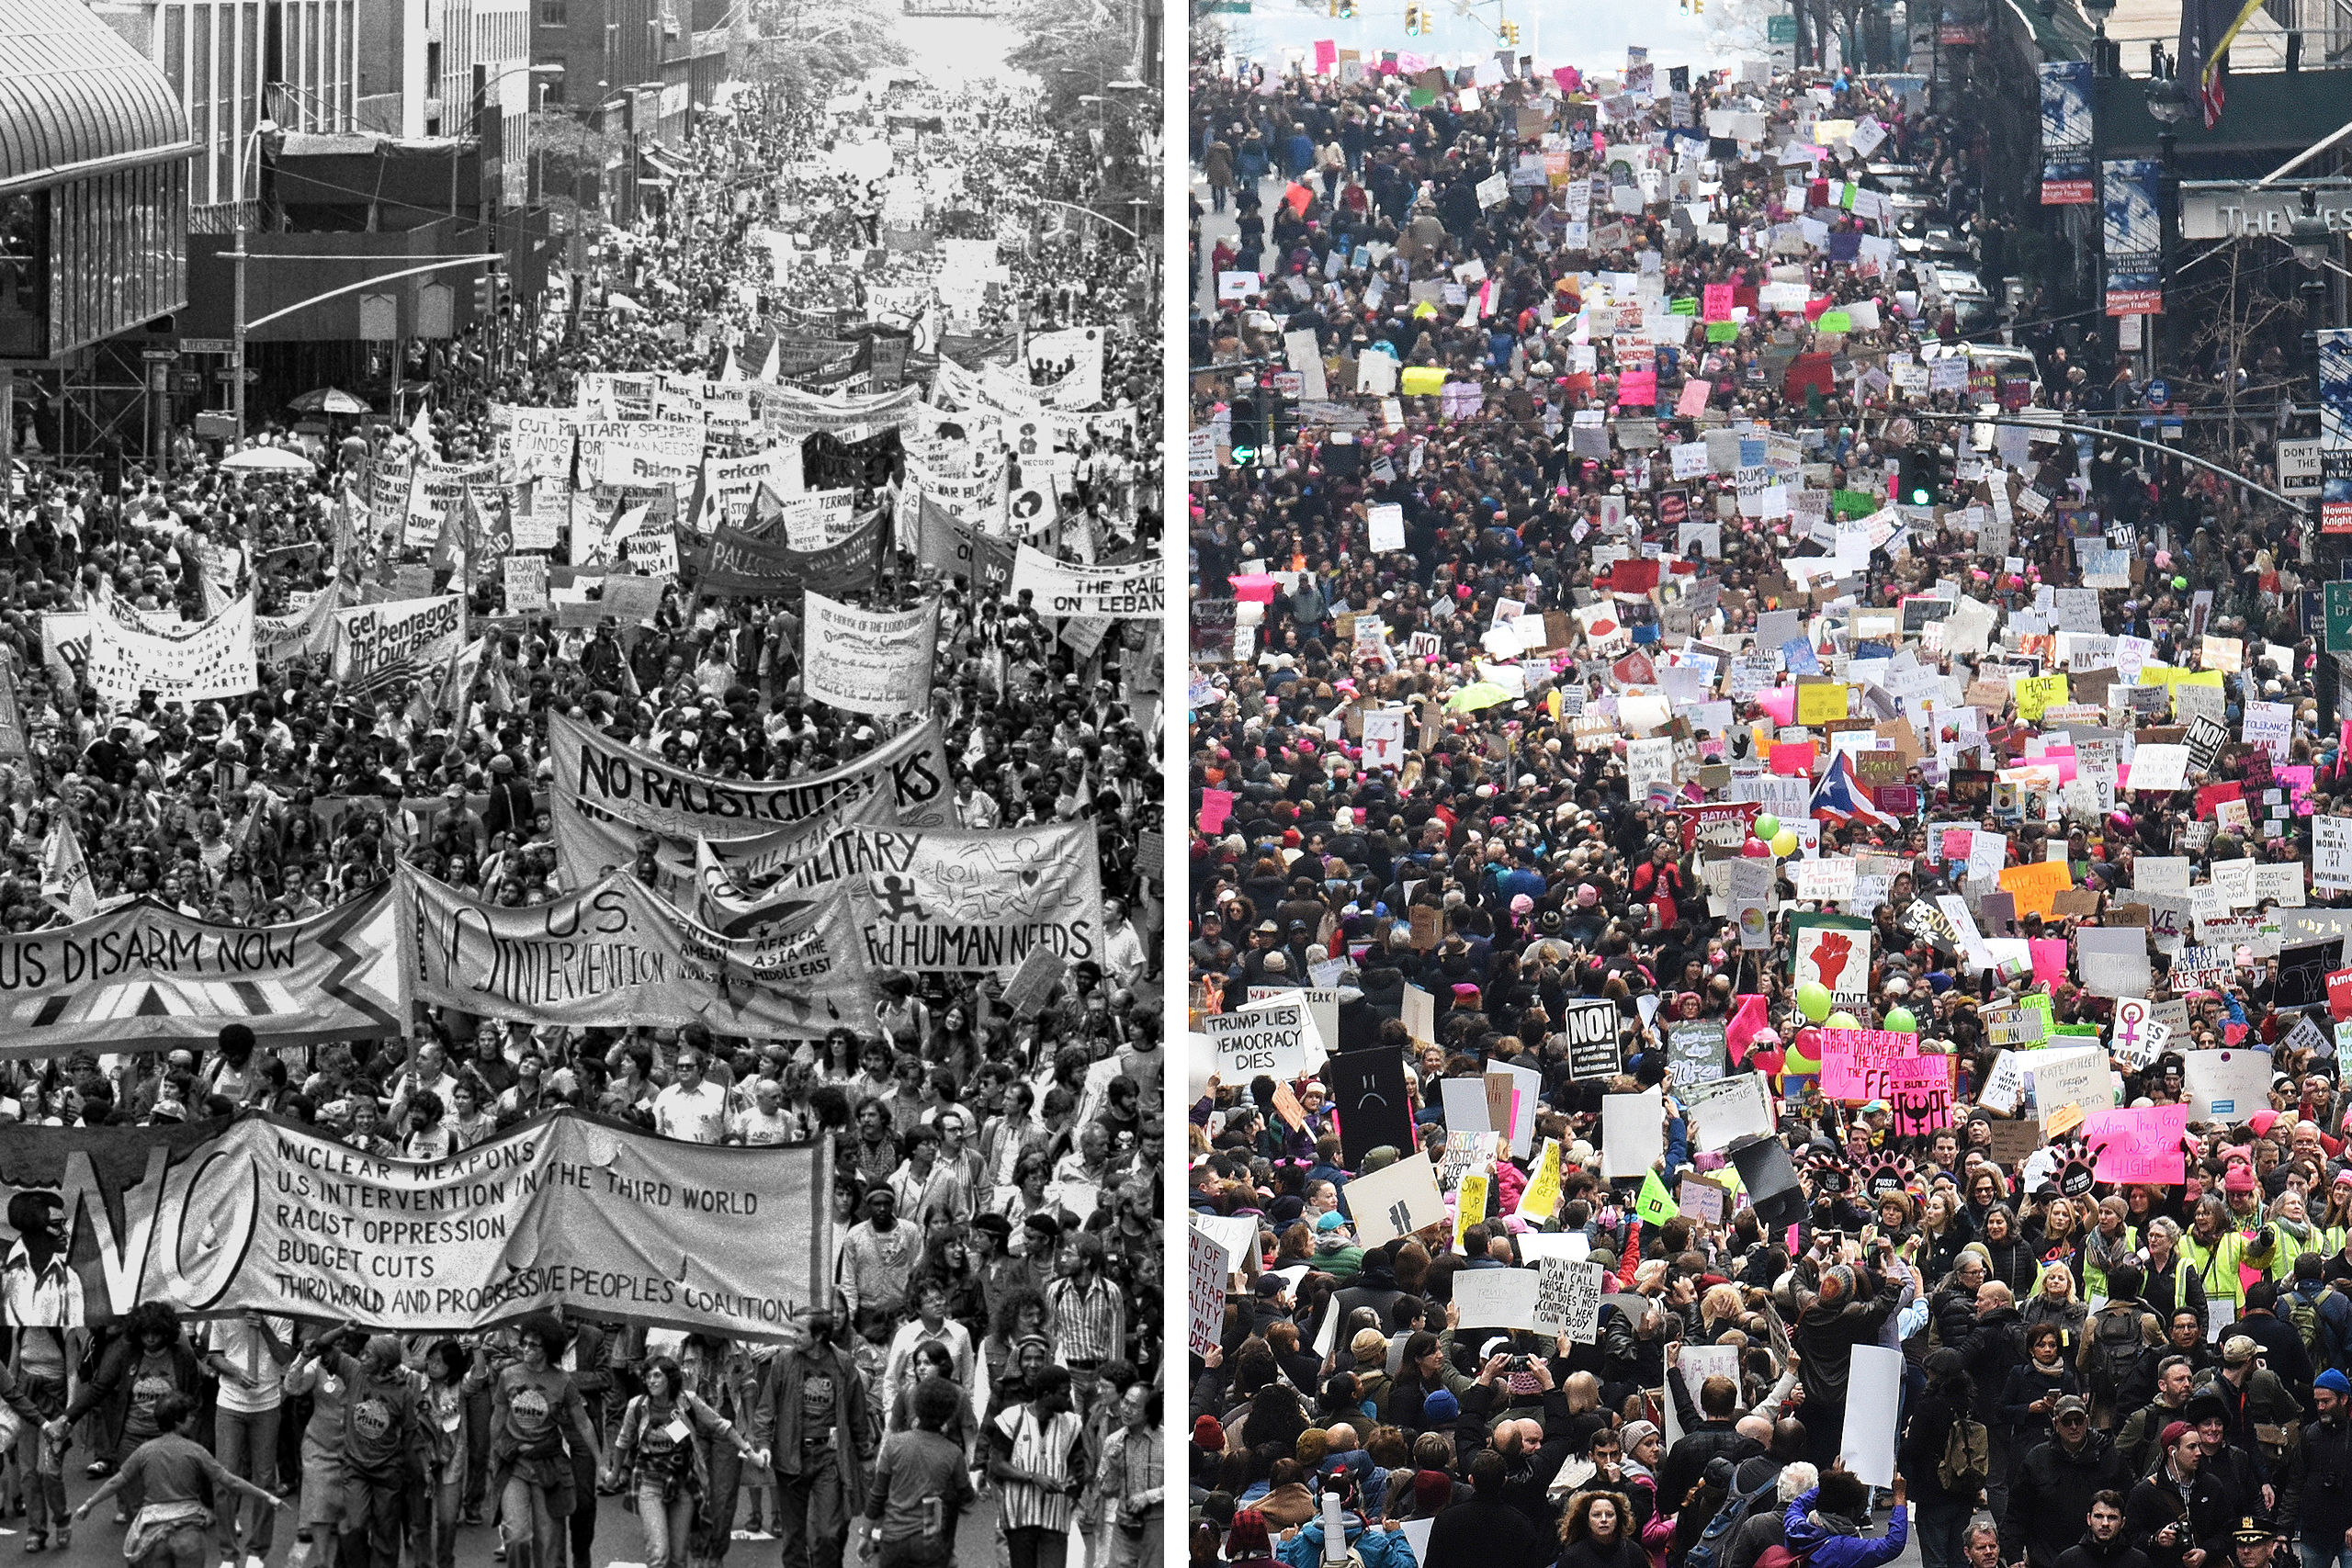 <i>Left</i>: Anti-nuke demonstration on 42nd St. in New York City on June 12, 1982; <i>Right</i>: Women's March on 42nd St. in New York City on Jan. 21, 2017. (Mike Lipack—New York Daily News Archive/Getty Images; Stephanie Keith—Reuters)